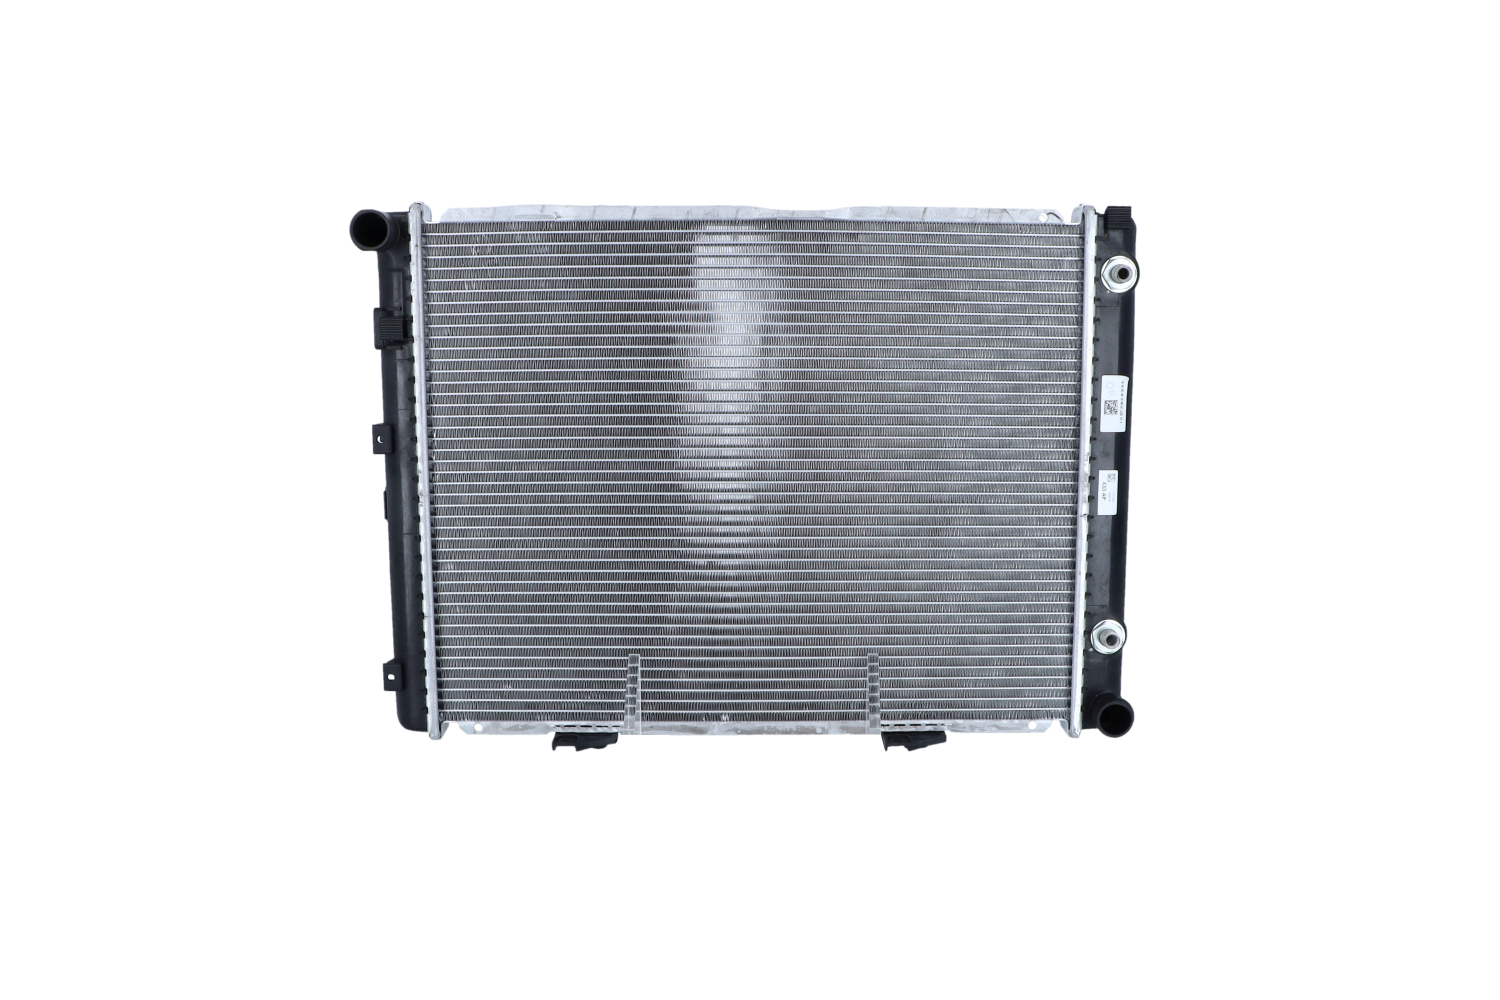 NRF 53866 Engine radiator Aluminium, 575 x 445 x 34 mm, with mounting parts, Brazed cooling fins